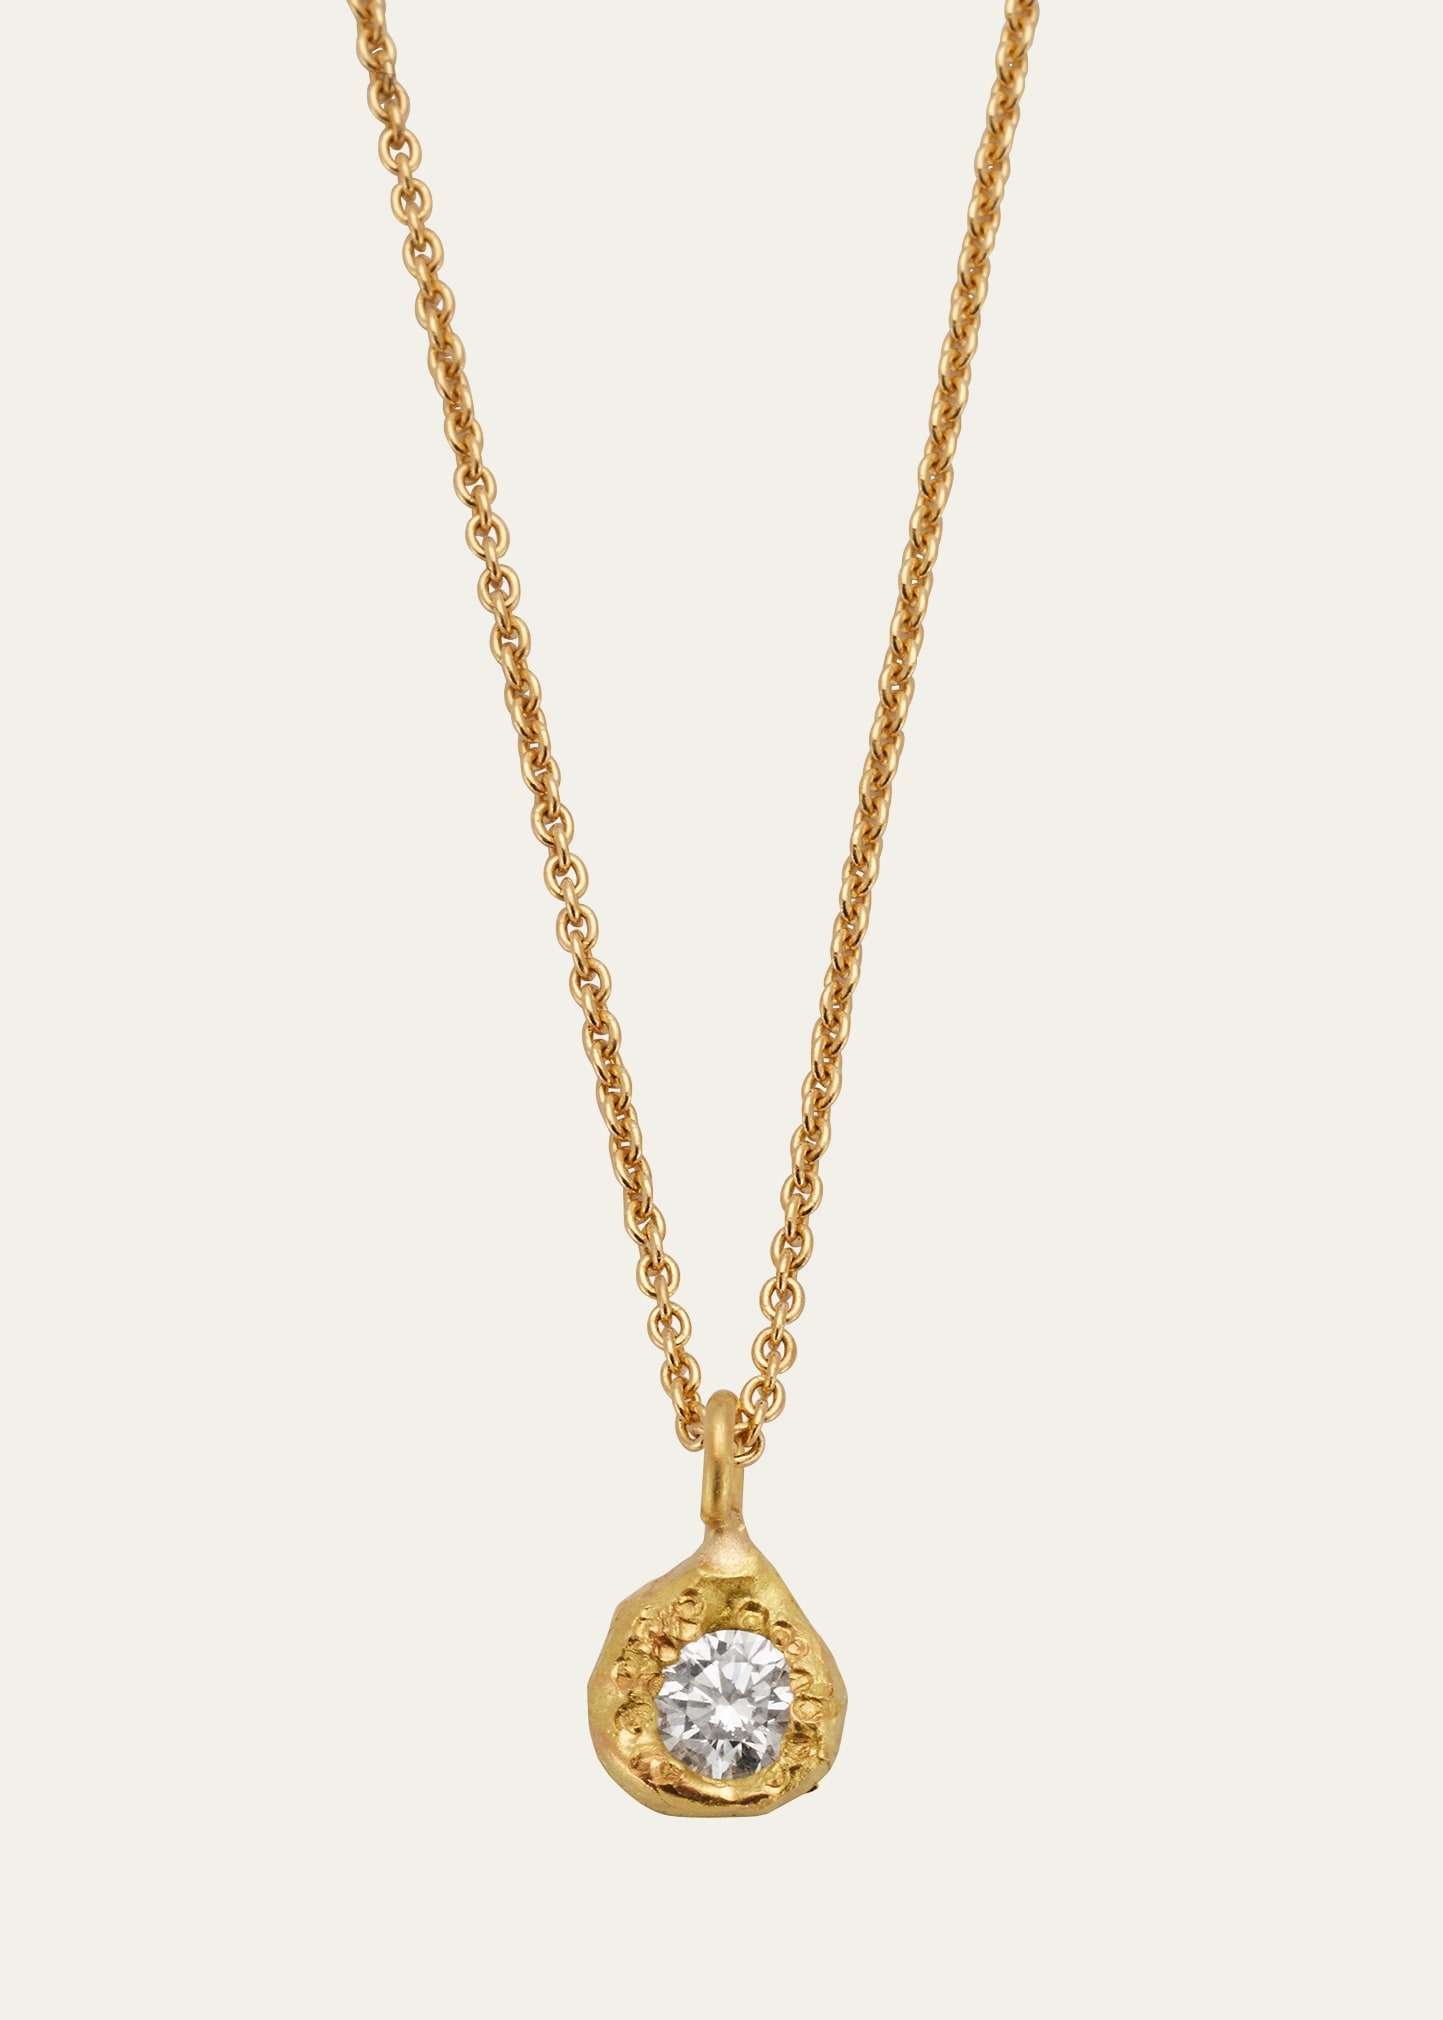 Elhanati Iman 18k Solid Yellow Gold Necklace With Top Wesselton Vvs Diamond In Yg